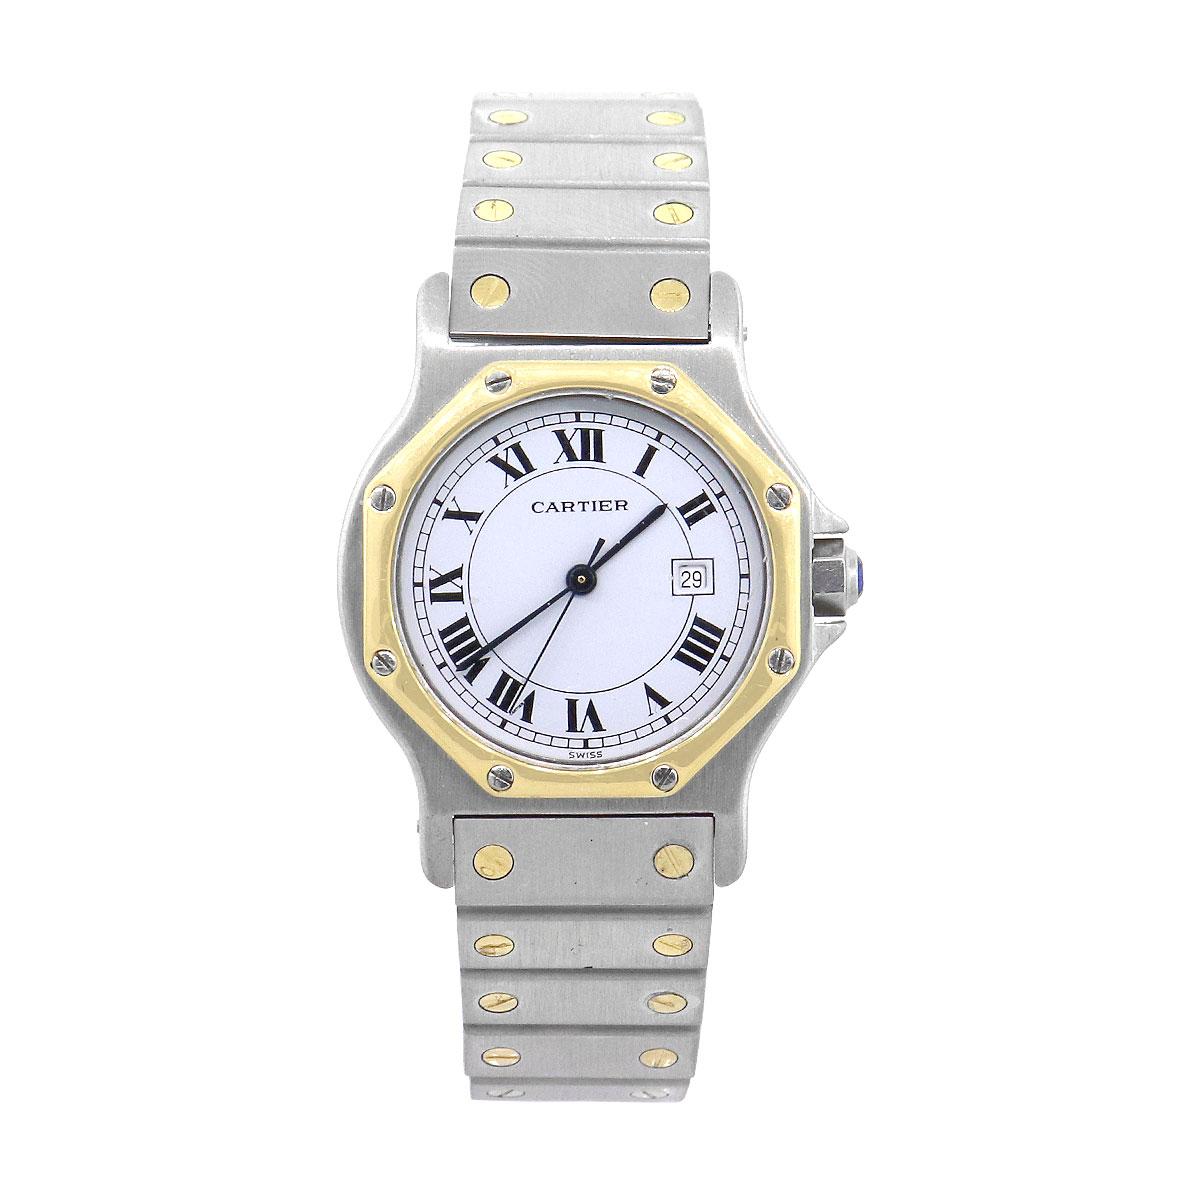 Brand: Cartier
Model: Santos
Case Material: Stainless steel
Case Diameter: 30mm
Crystal: Sapphire crystal
Bezel: Smooth 18k yellow gold Octagon shaped bezel with stainless steel Cartier screws
Dial: White dial with black roman numerals. Blue hour